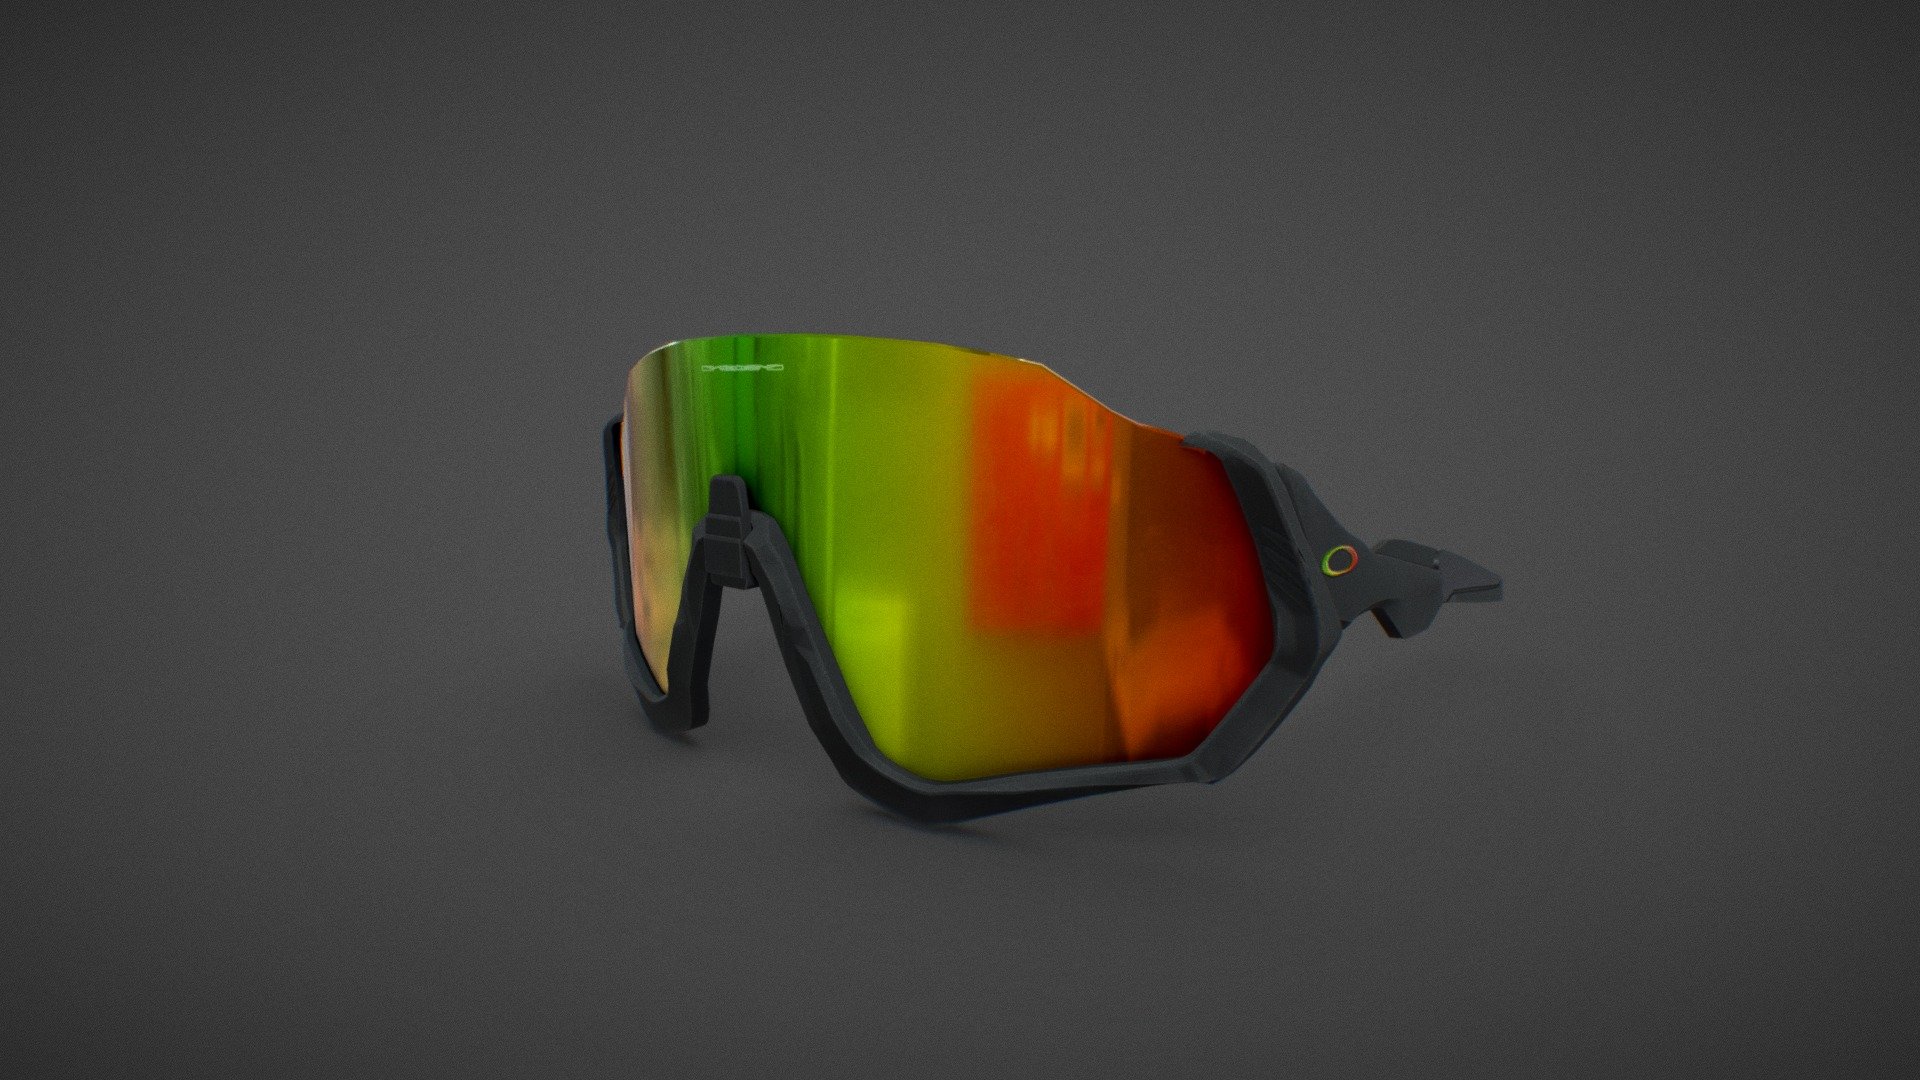 Fate brought you here at good time, you can find free models in my profile. Technical details: PBR textured Low Poly glasses for a general 3D software, Unity 3D (URP), Unreal Engine 4 you will find the 1k and 2k textures.

You can also see the complete oakley radar package:https://sketchfab.com/3d-models/glasses-oakley-radar-group-eaef512eb5724f4c8084c0a1b85dcaa4

El destino te trajo aqui en hora buena, puedes encontrar modelos free en mi perfil. Detalles tecnicos: Gafas Low Poly texturizadas PBR para un software generalista 3D, Unity 3D (URP), Unreal Engine 4 encontraras las texturas 1k y 2k.

Tambien puedes ver el paquete completo de oakley radar:https://sketchfab.com/3d-models/glasses-oakley-radar-group-eaef512eb5724f4c8084c0a1b85dcaa4 - Oakley flight jacket Glasses Rastafari - Buy Royalty Free 3D model by ArnoldE (@arnoldescorcia906) 3d model